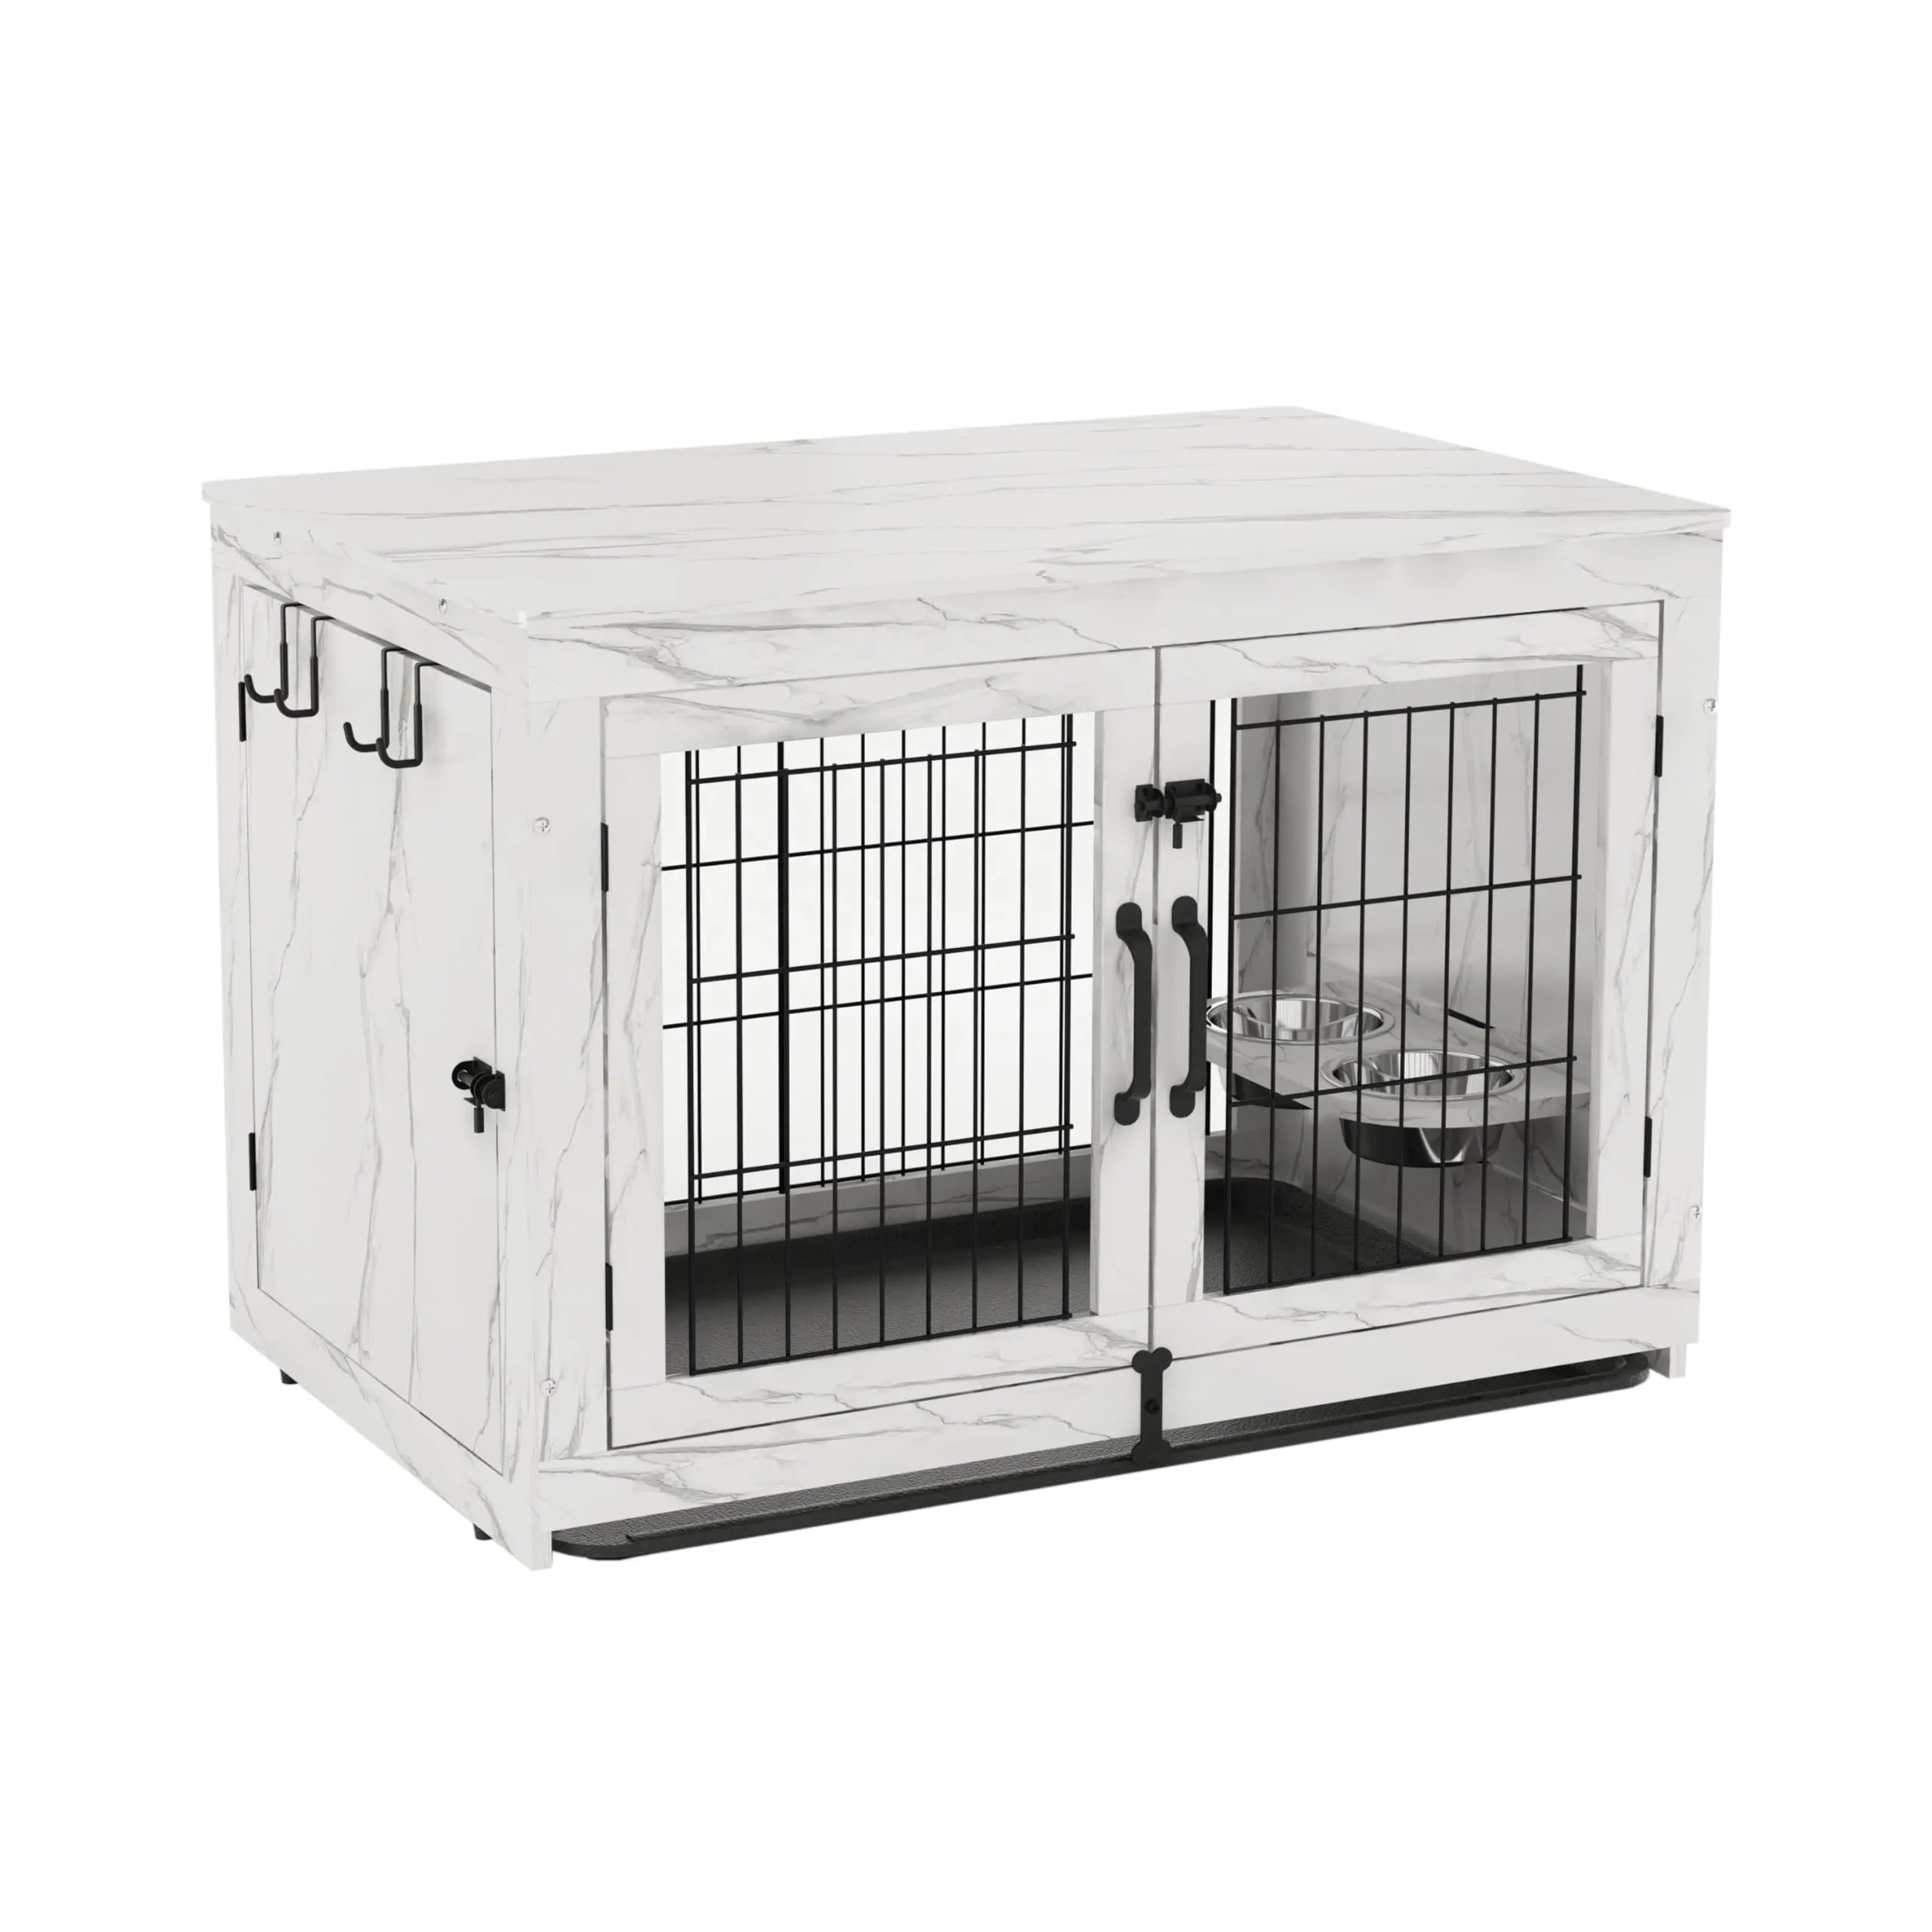 Modern Luxury Outdoor Wooden Dog Kennel Small Animal House Nest for Dogs and Cats Solid Metal Pet Carrier